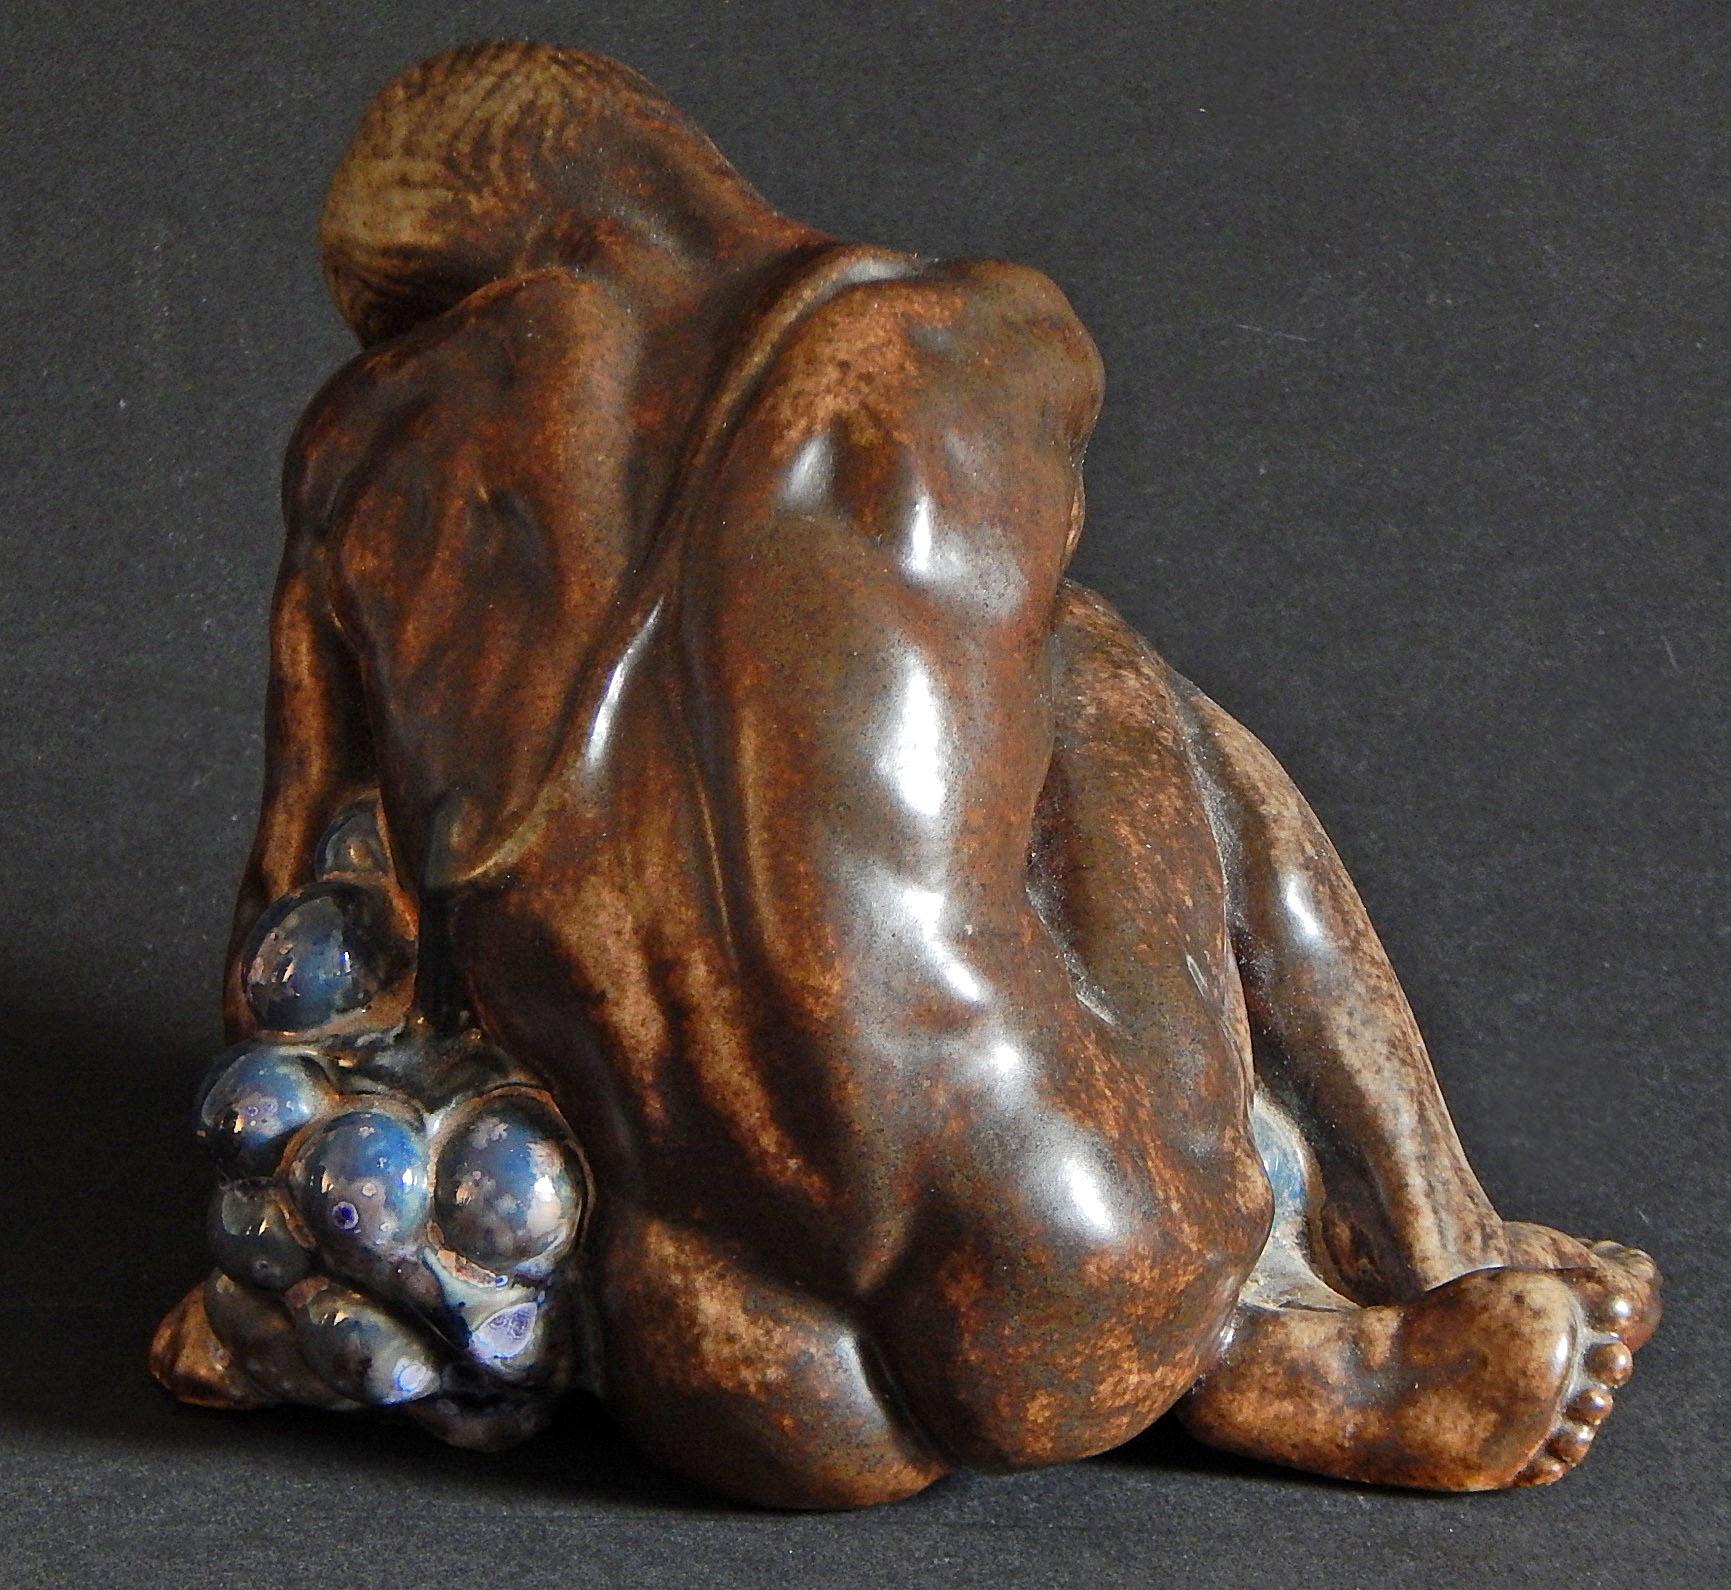 This sensuous ceramic piece depicts a beautifully sculpted nude figure embracing an exaggerated grape cluster, sculpted by Kai Nielsen for Bing & Grondahl in Copenhagen. While all examples of this piece are rare, the glazes here are extremely